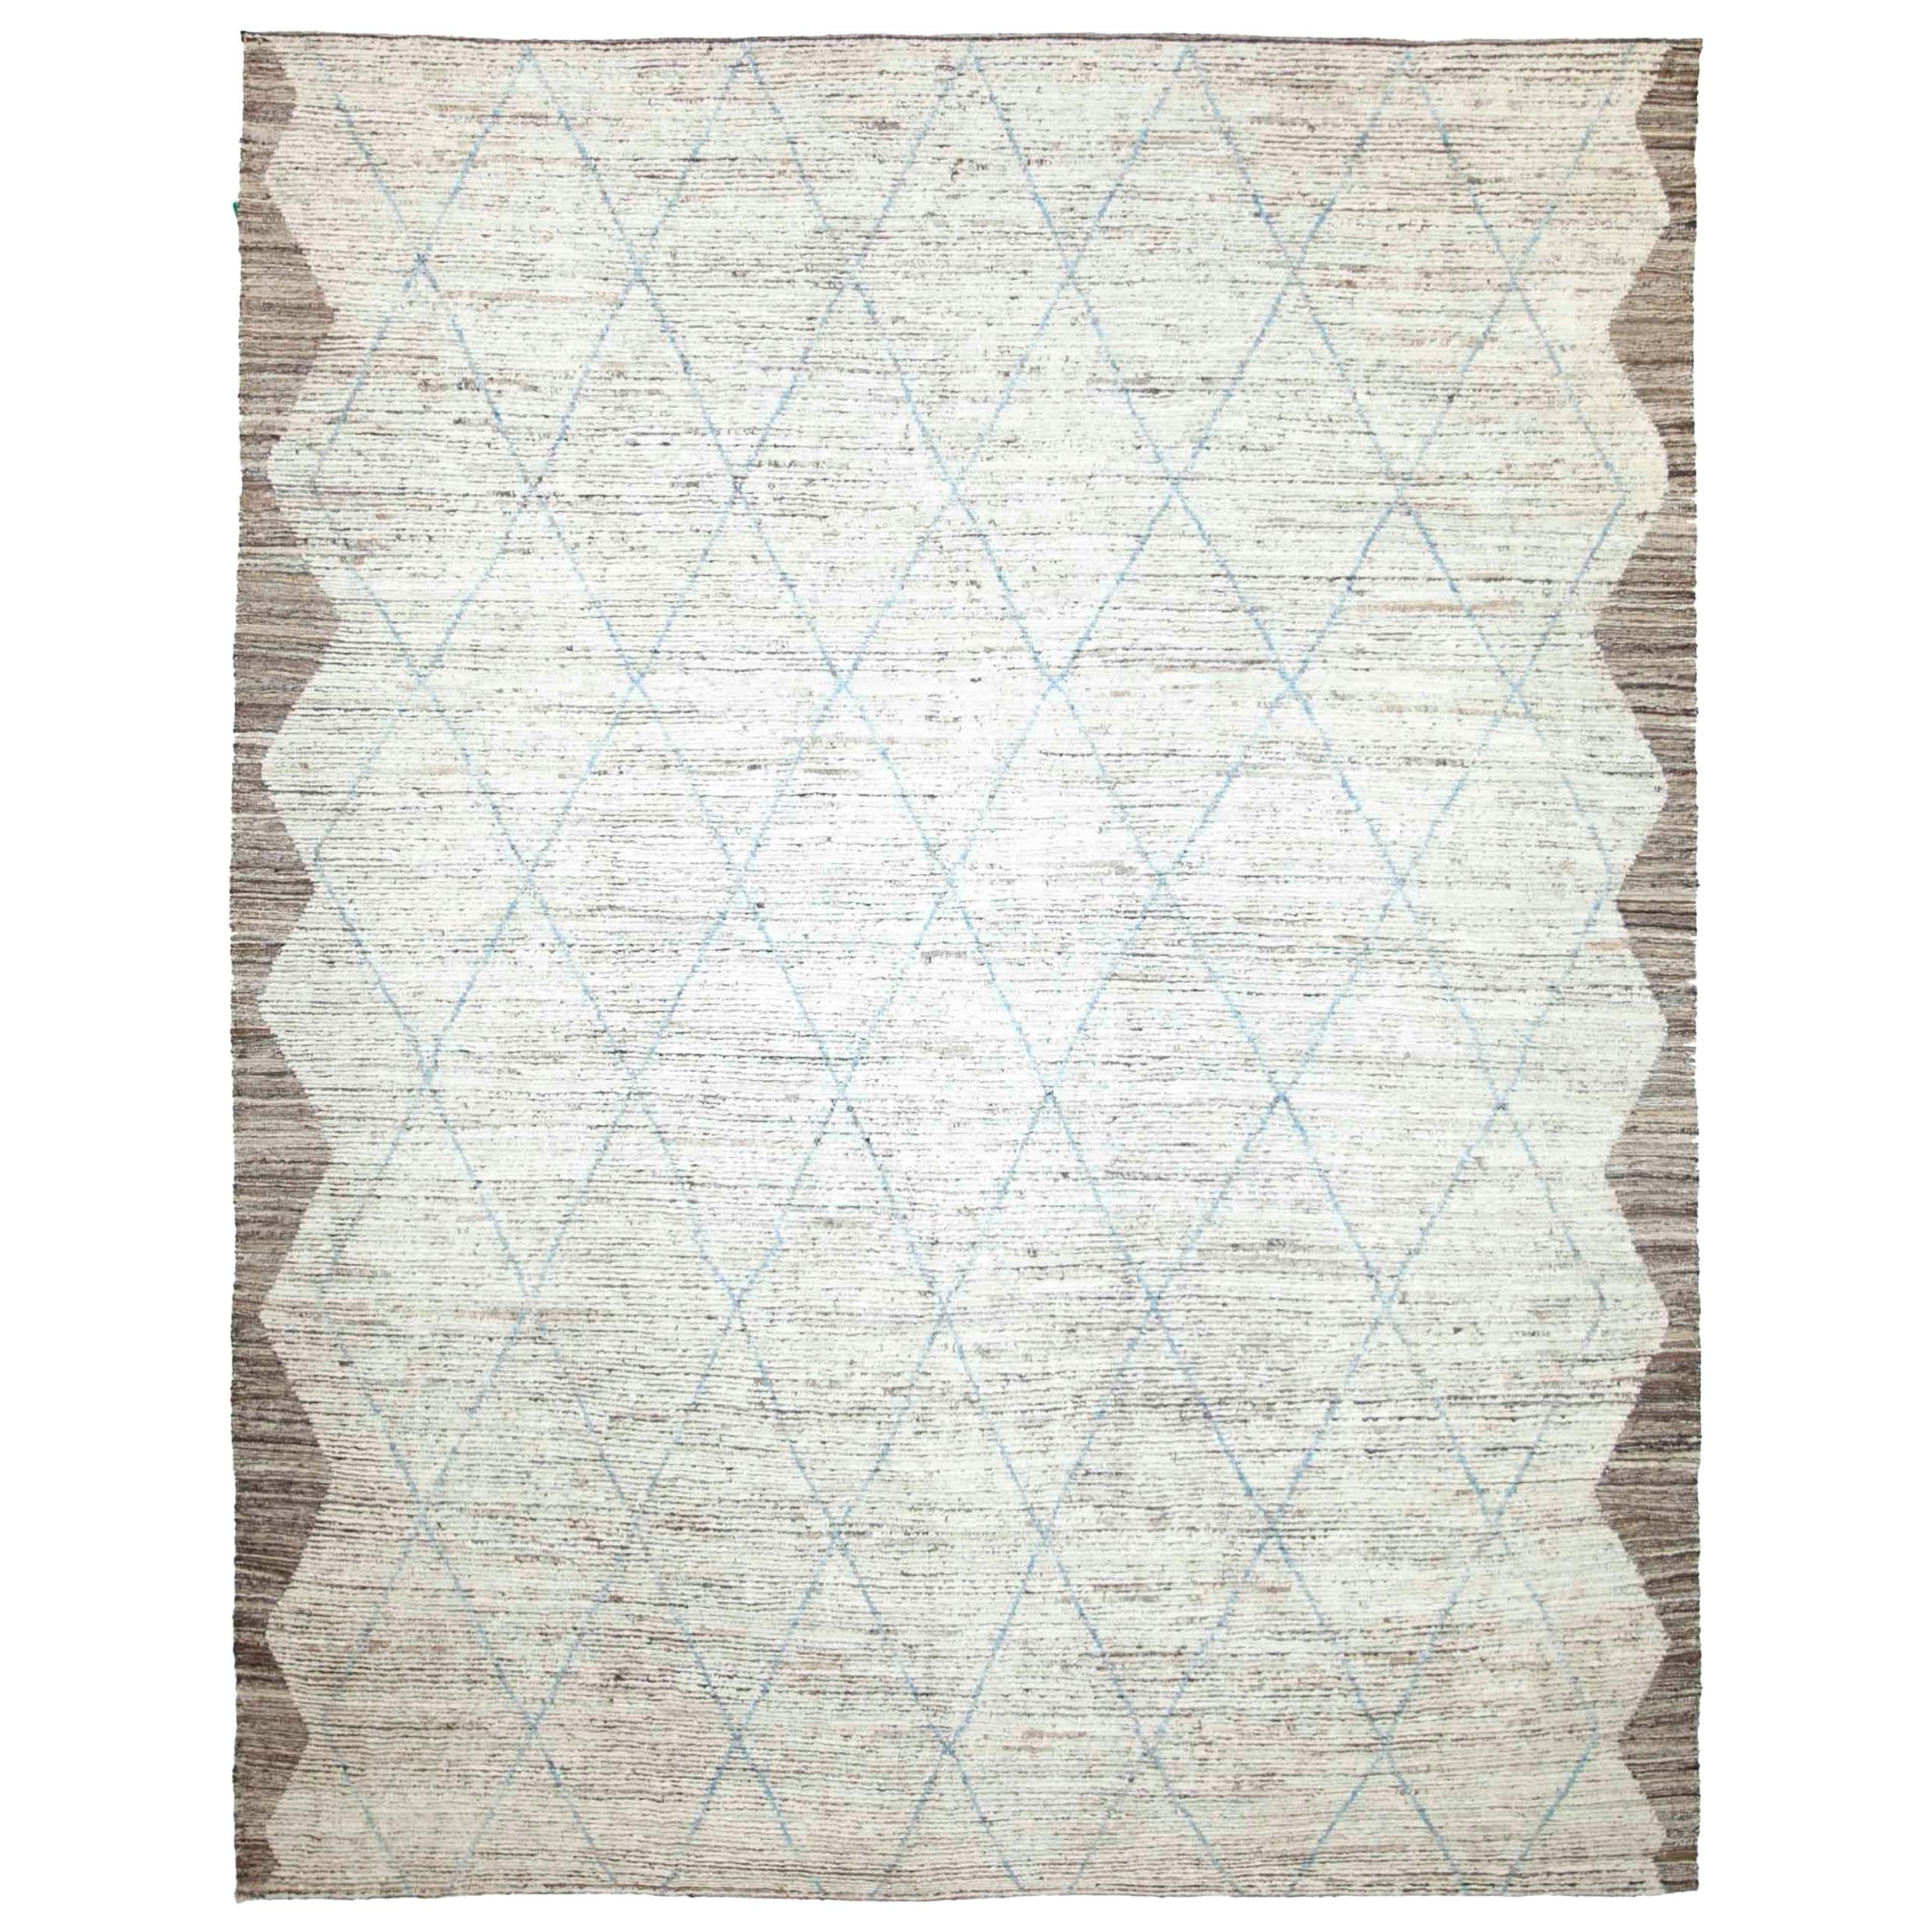 Modern Afghan Moroccan Style Rug with Blue Diamonds and Brown Border